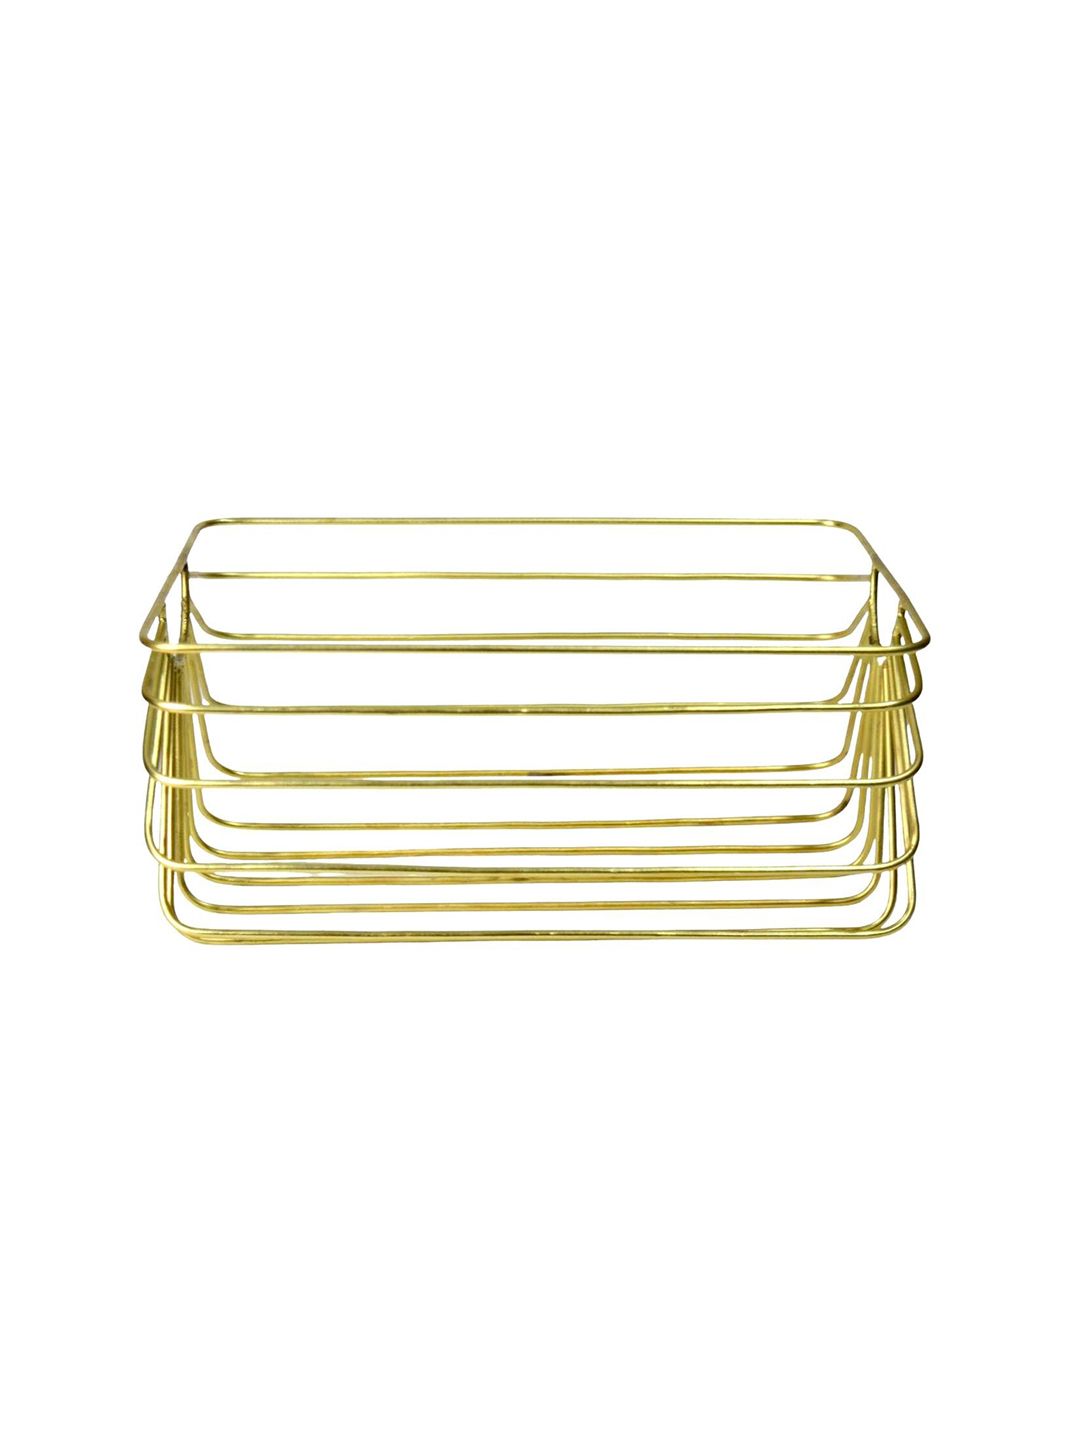 Tranquil square Gold-Toned Solid Metal Kitchen Storage Price in India